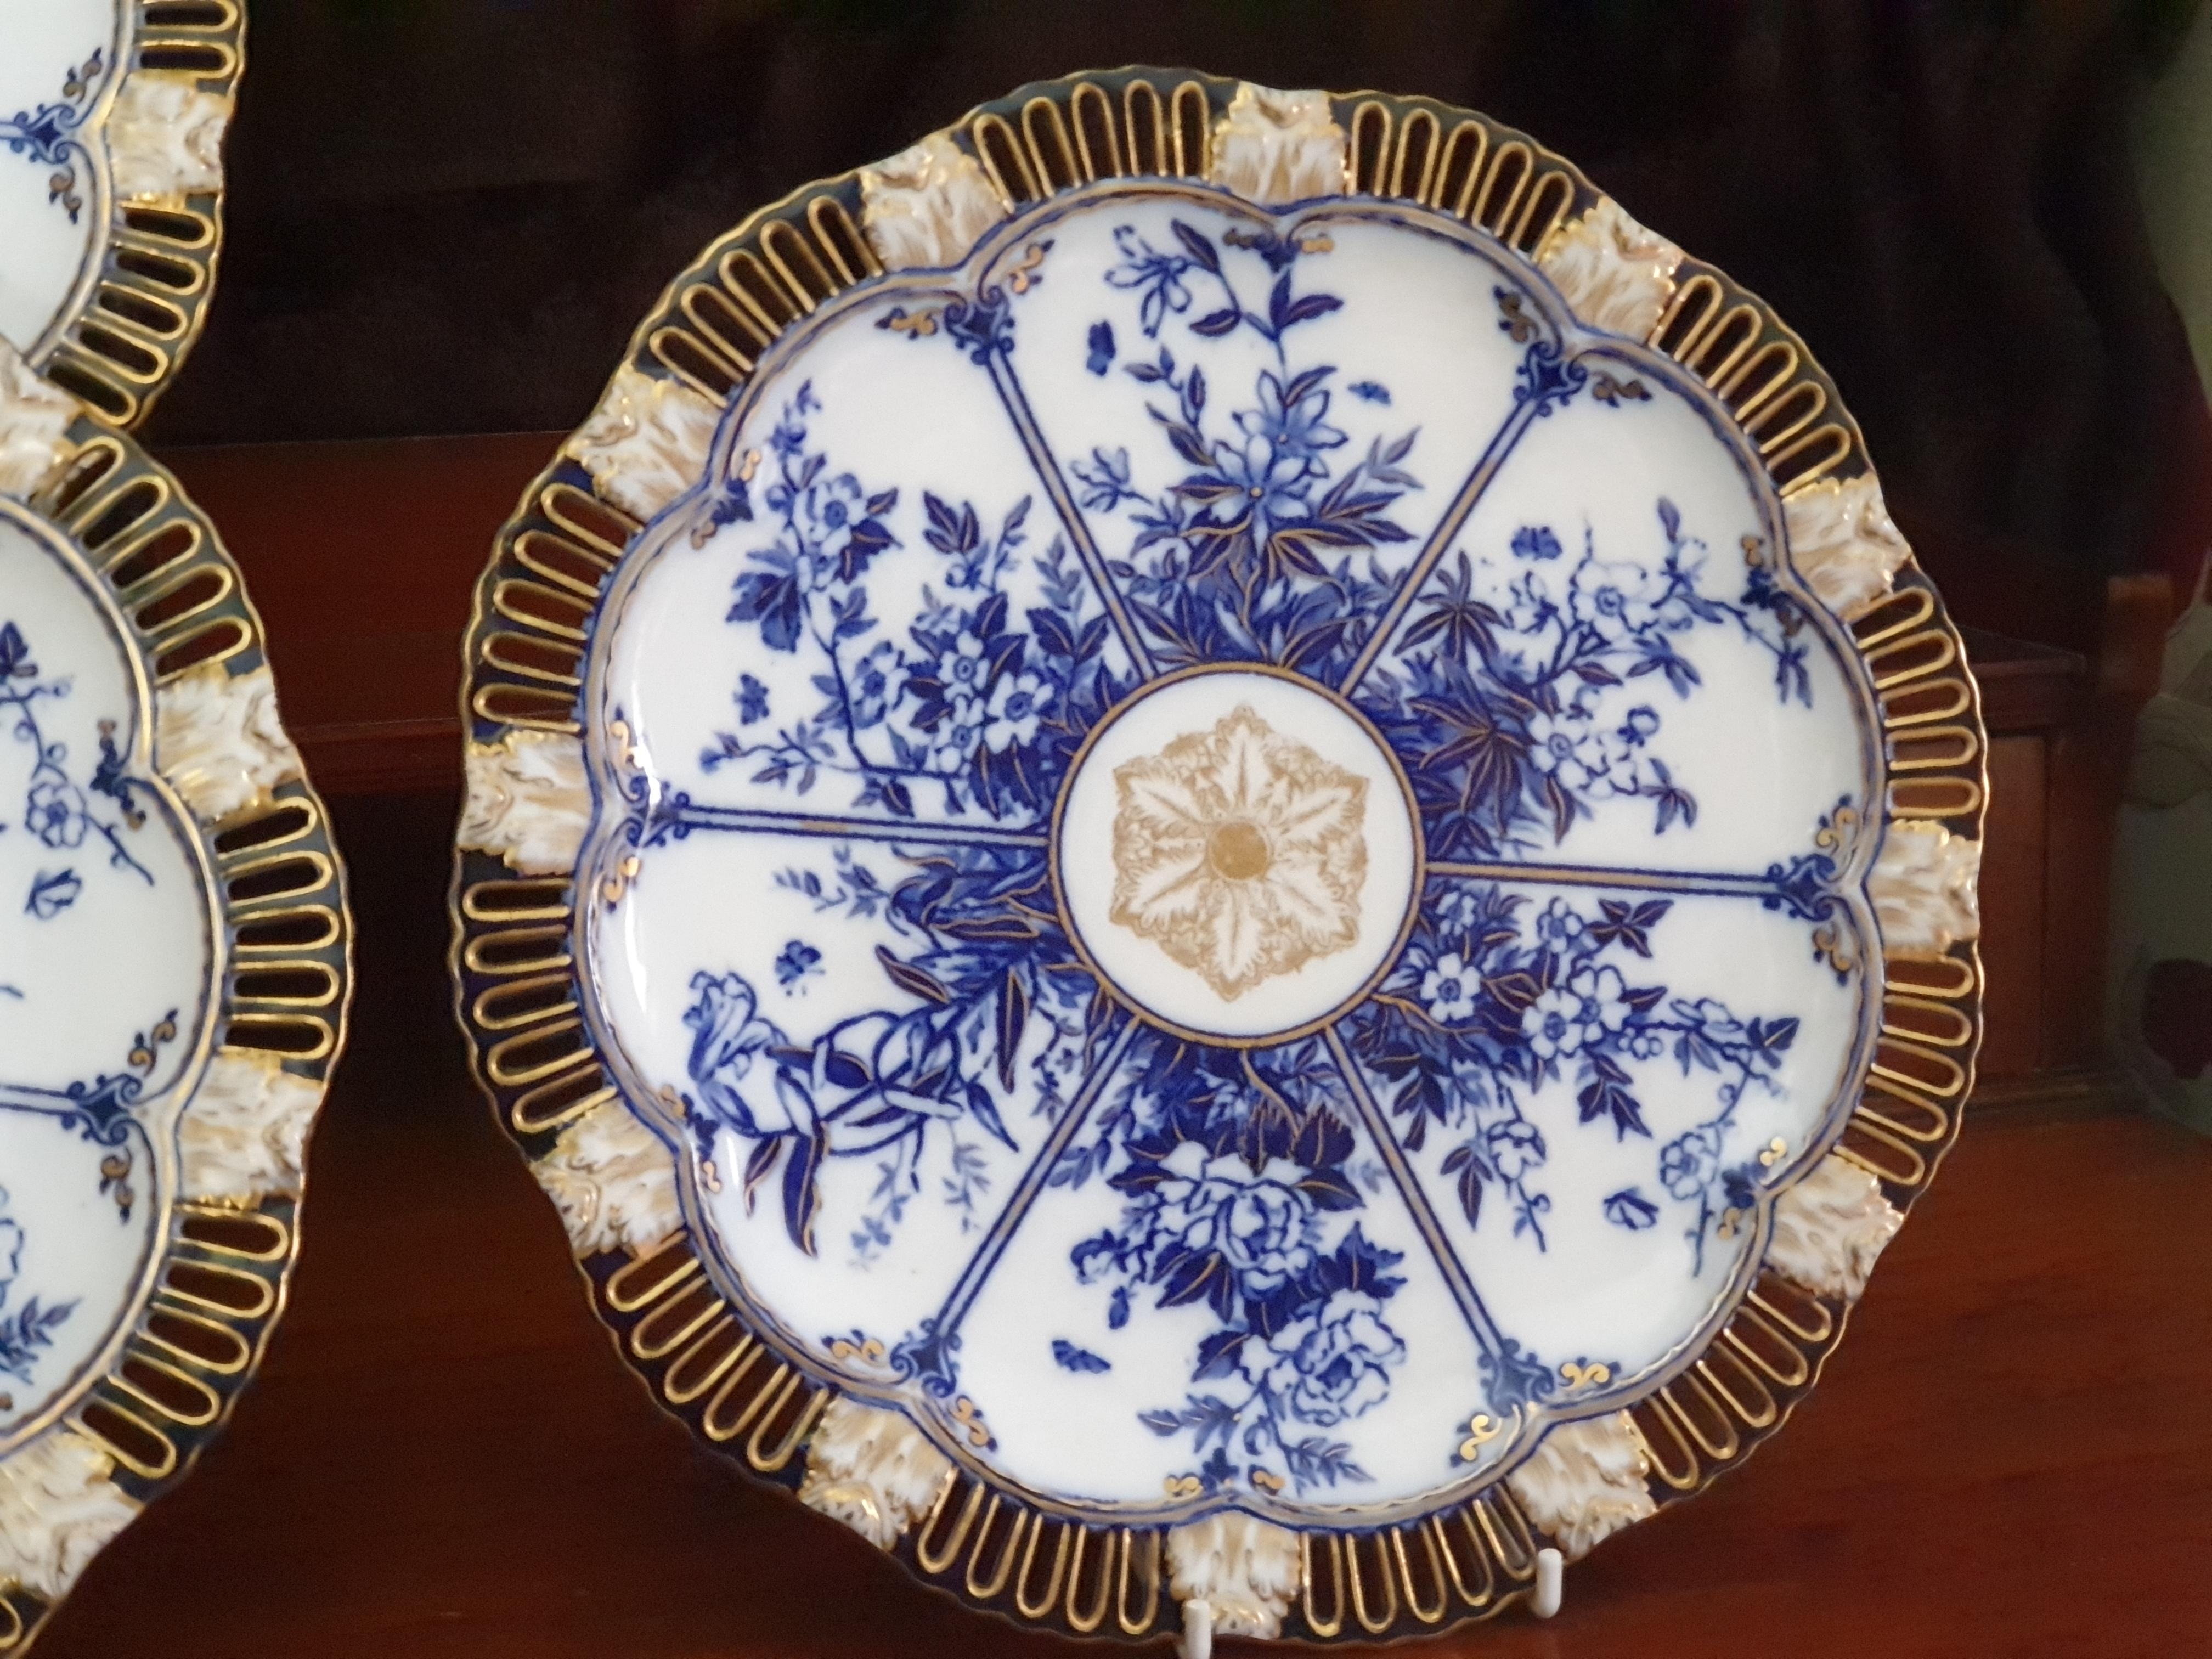 A set of 4 impressive reticulated Coalport cabinet plates decorated in blue & white with 24-karat gold gilding finish, floral panelled scene with lotus flowers in the middle, early 19th century.